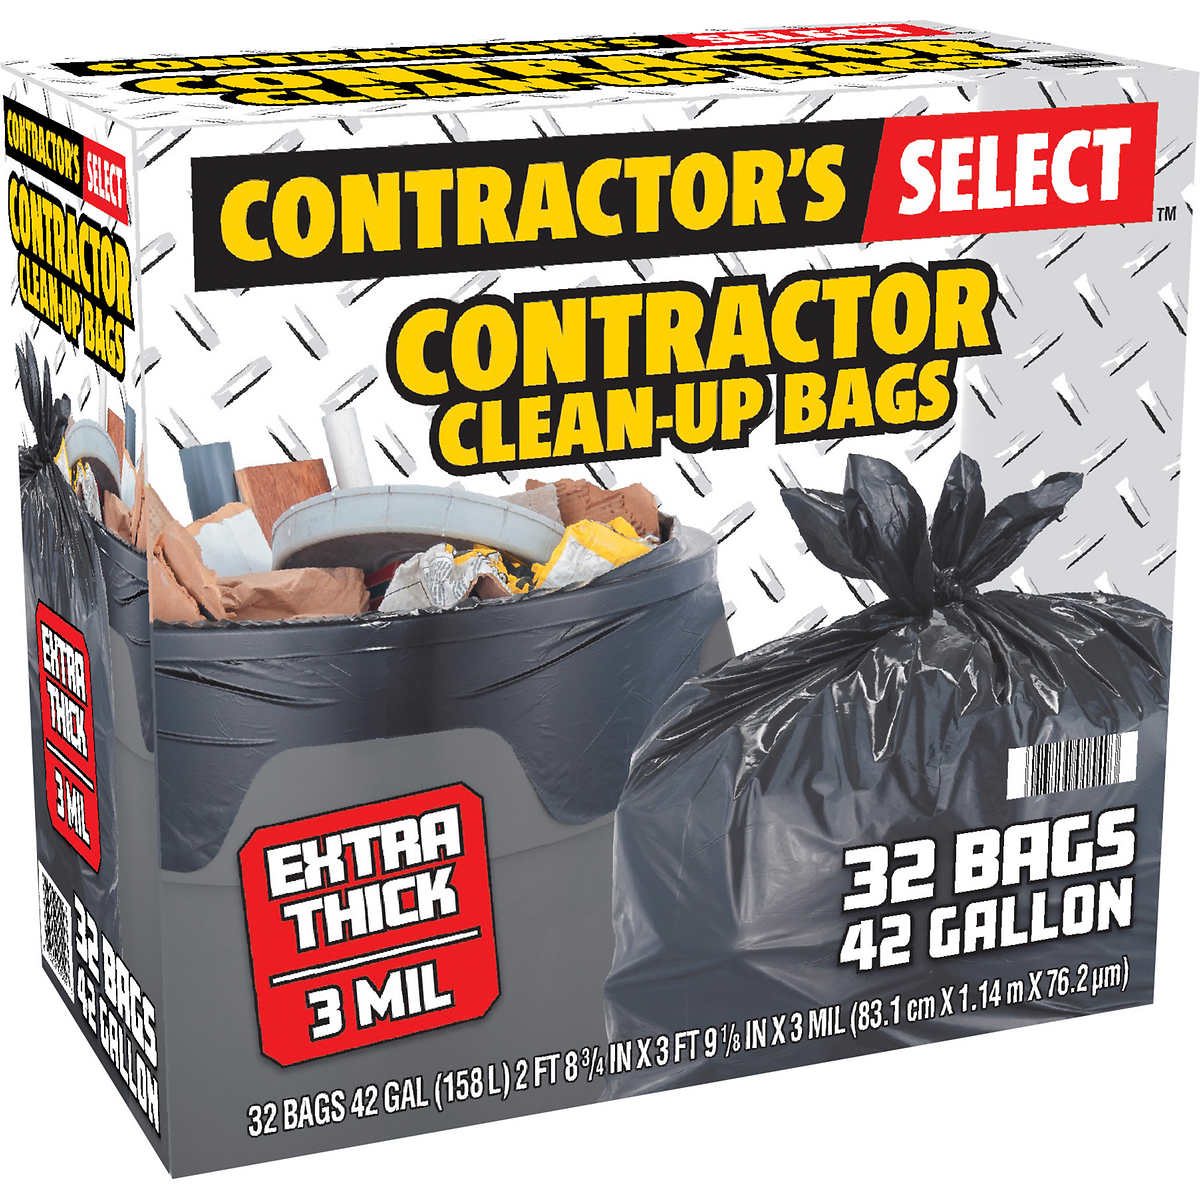 Contractor's Select Contractor Clean-Up Bags, Extra Thick, Black, 42 Gal, 32 Ct